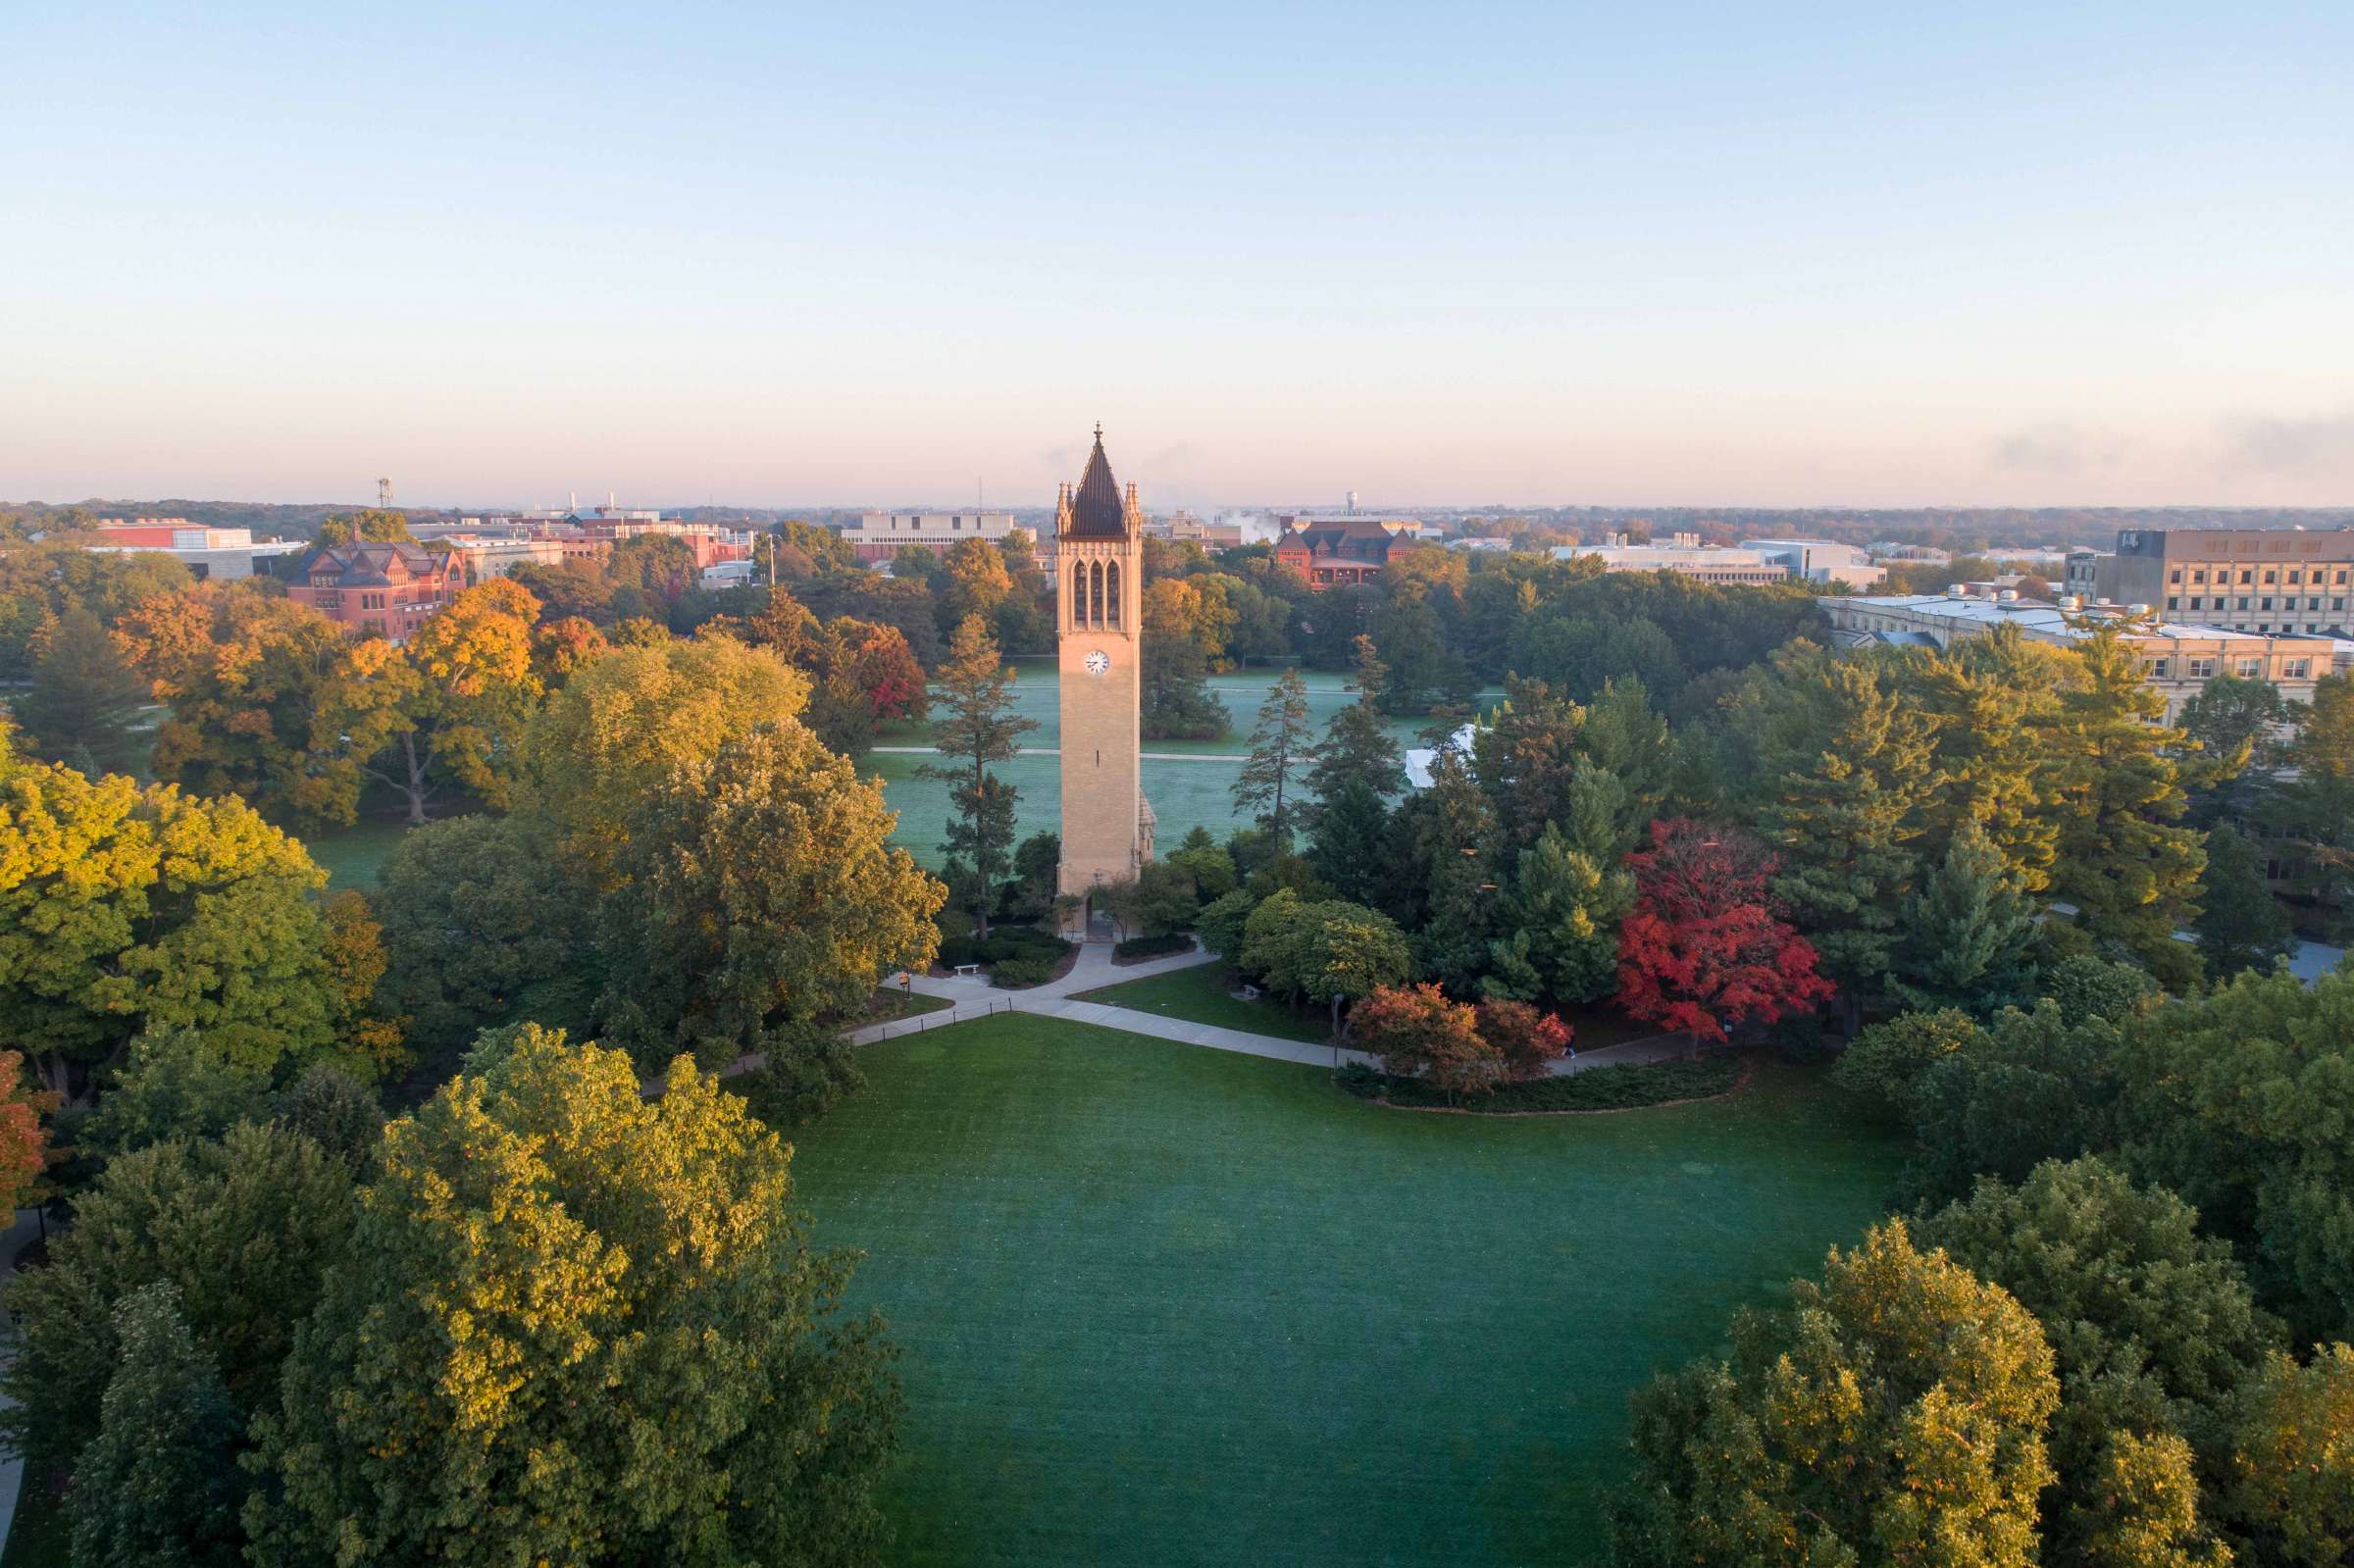 Drone photo of central campus featuring the campanile